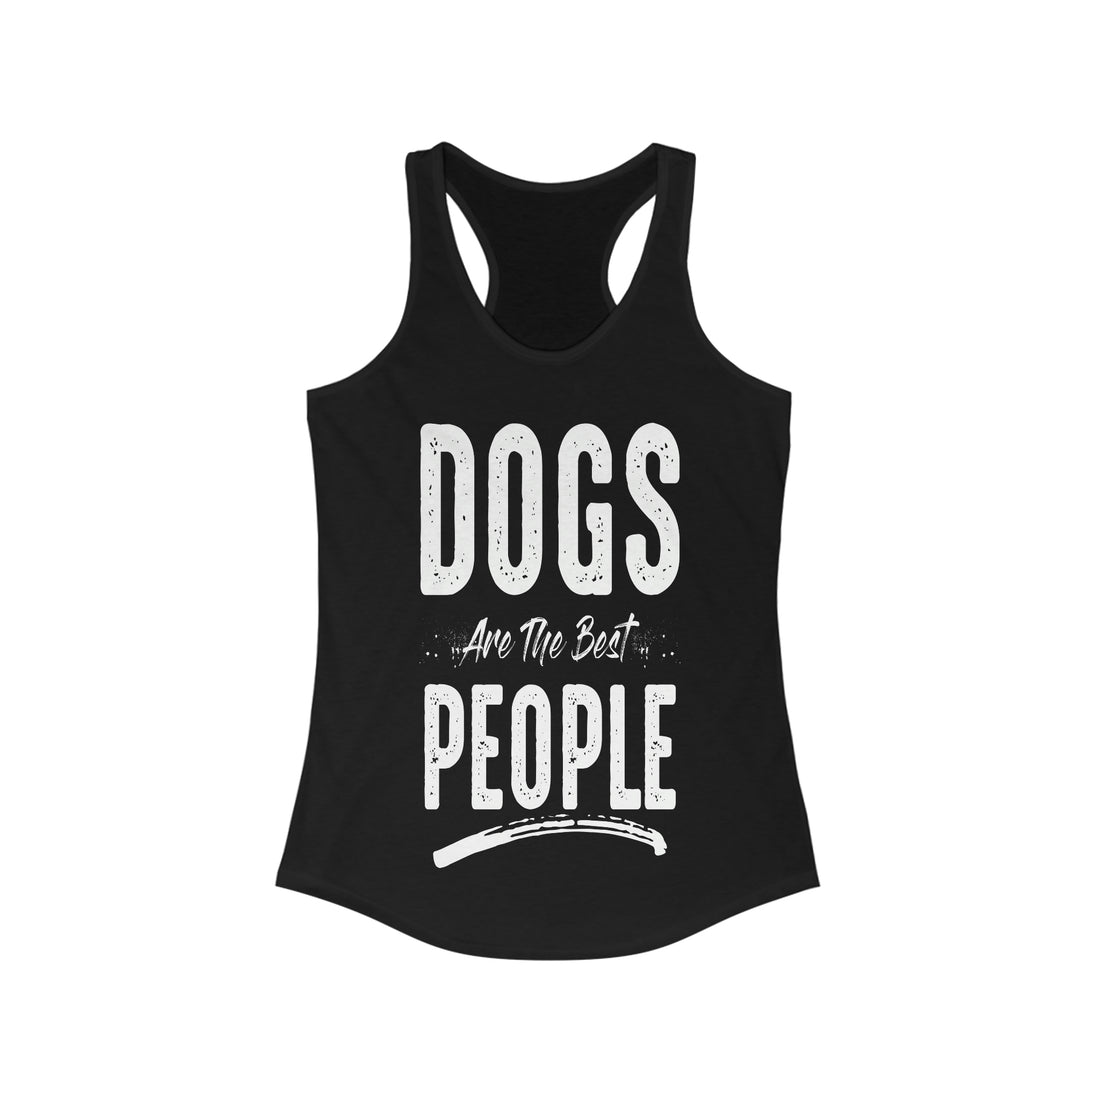 Dogs Are The Best People - Racerback Tank Top